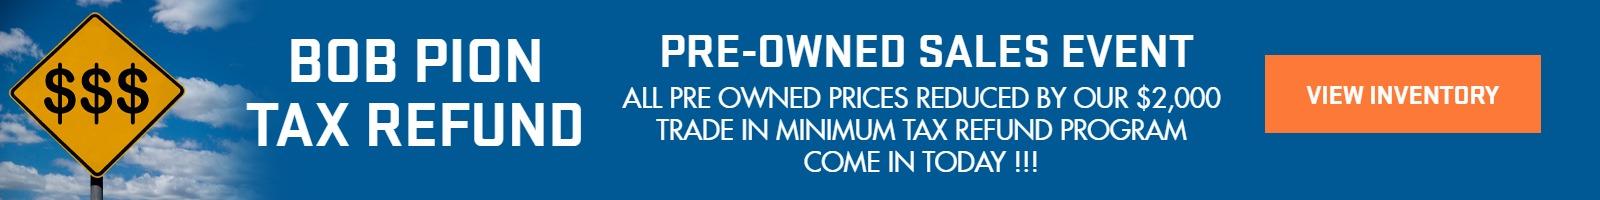 Pre-Owned Sales EVENT
All Pre Owned Prices reduced by our $2,000 Trade it Minimum TAX REFUND PROGRAM
COME IN TODAY !!!